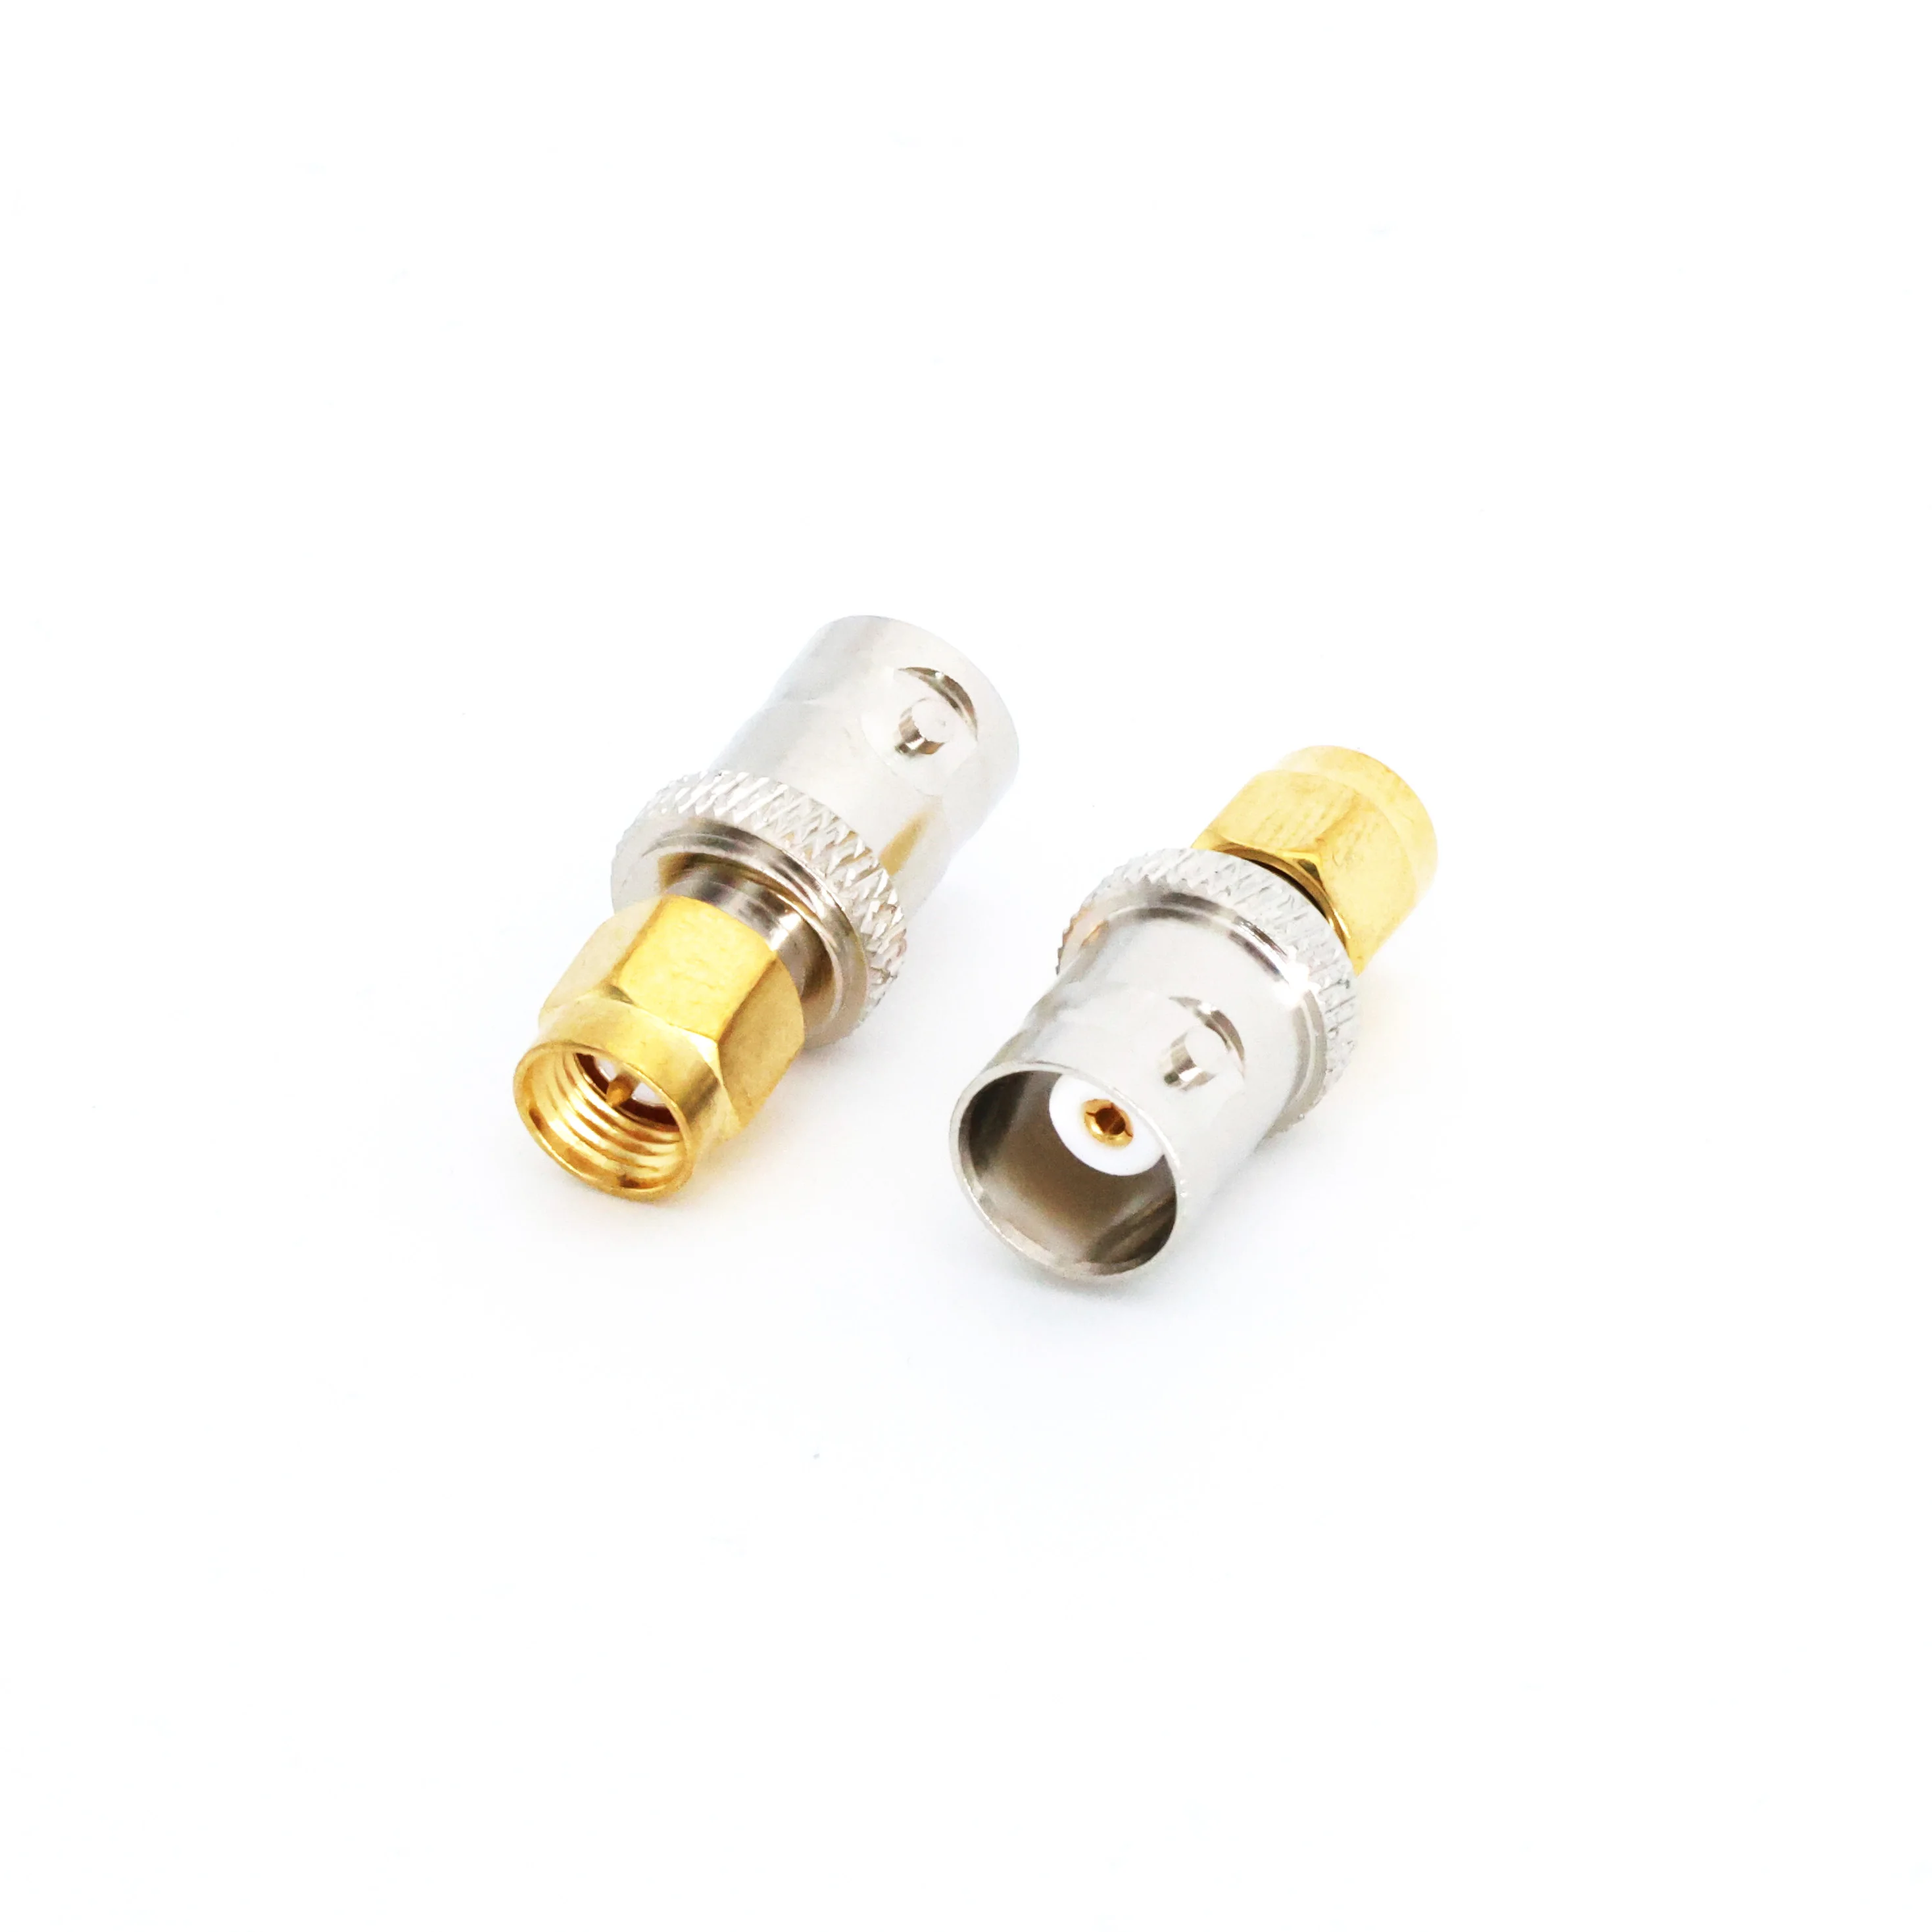 2pcs Coaxial connector SMA to BNC SMA (inner screw inner needle) to BNC female SMA-J/BNC-K adapter 2pcs sma female to uhf female adapter walkie talkie replacement for baofeng uv 5r series radio coaxial rf connector